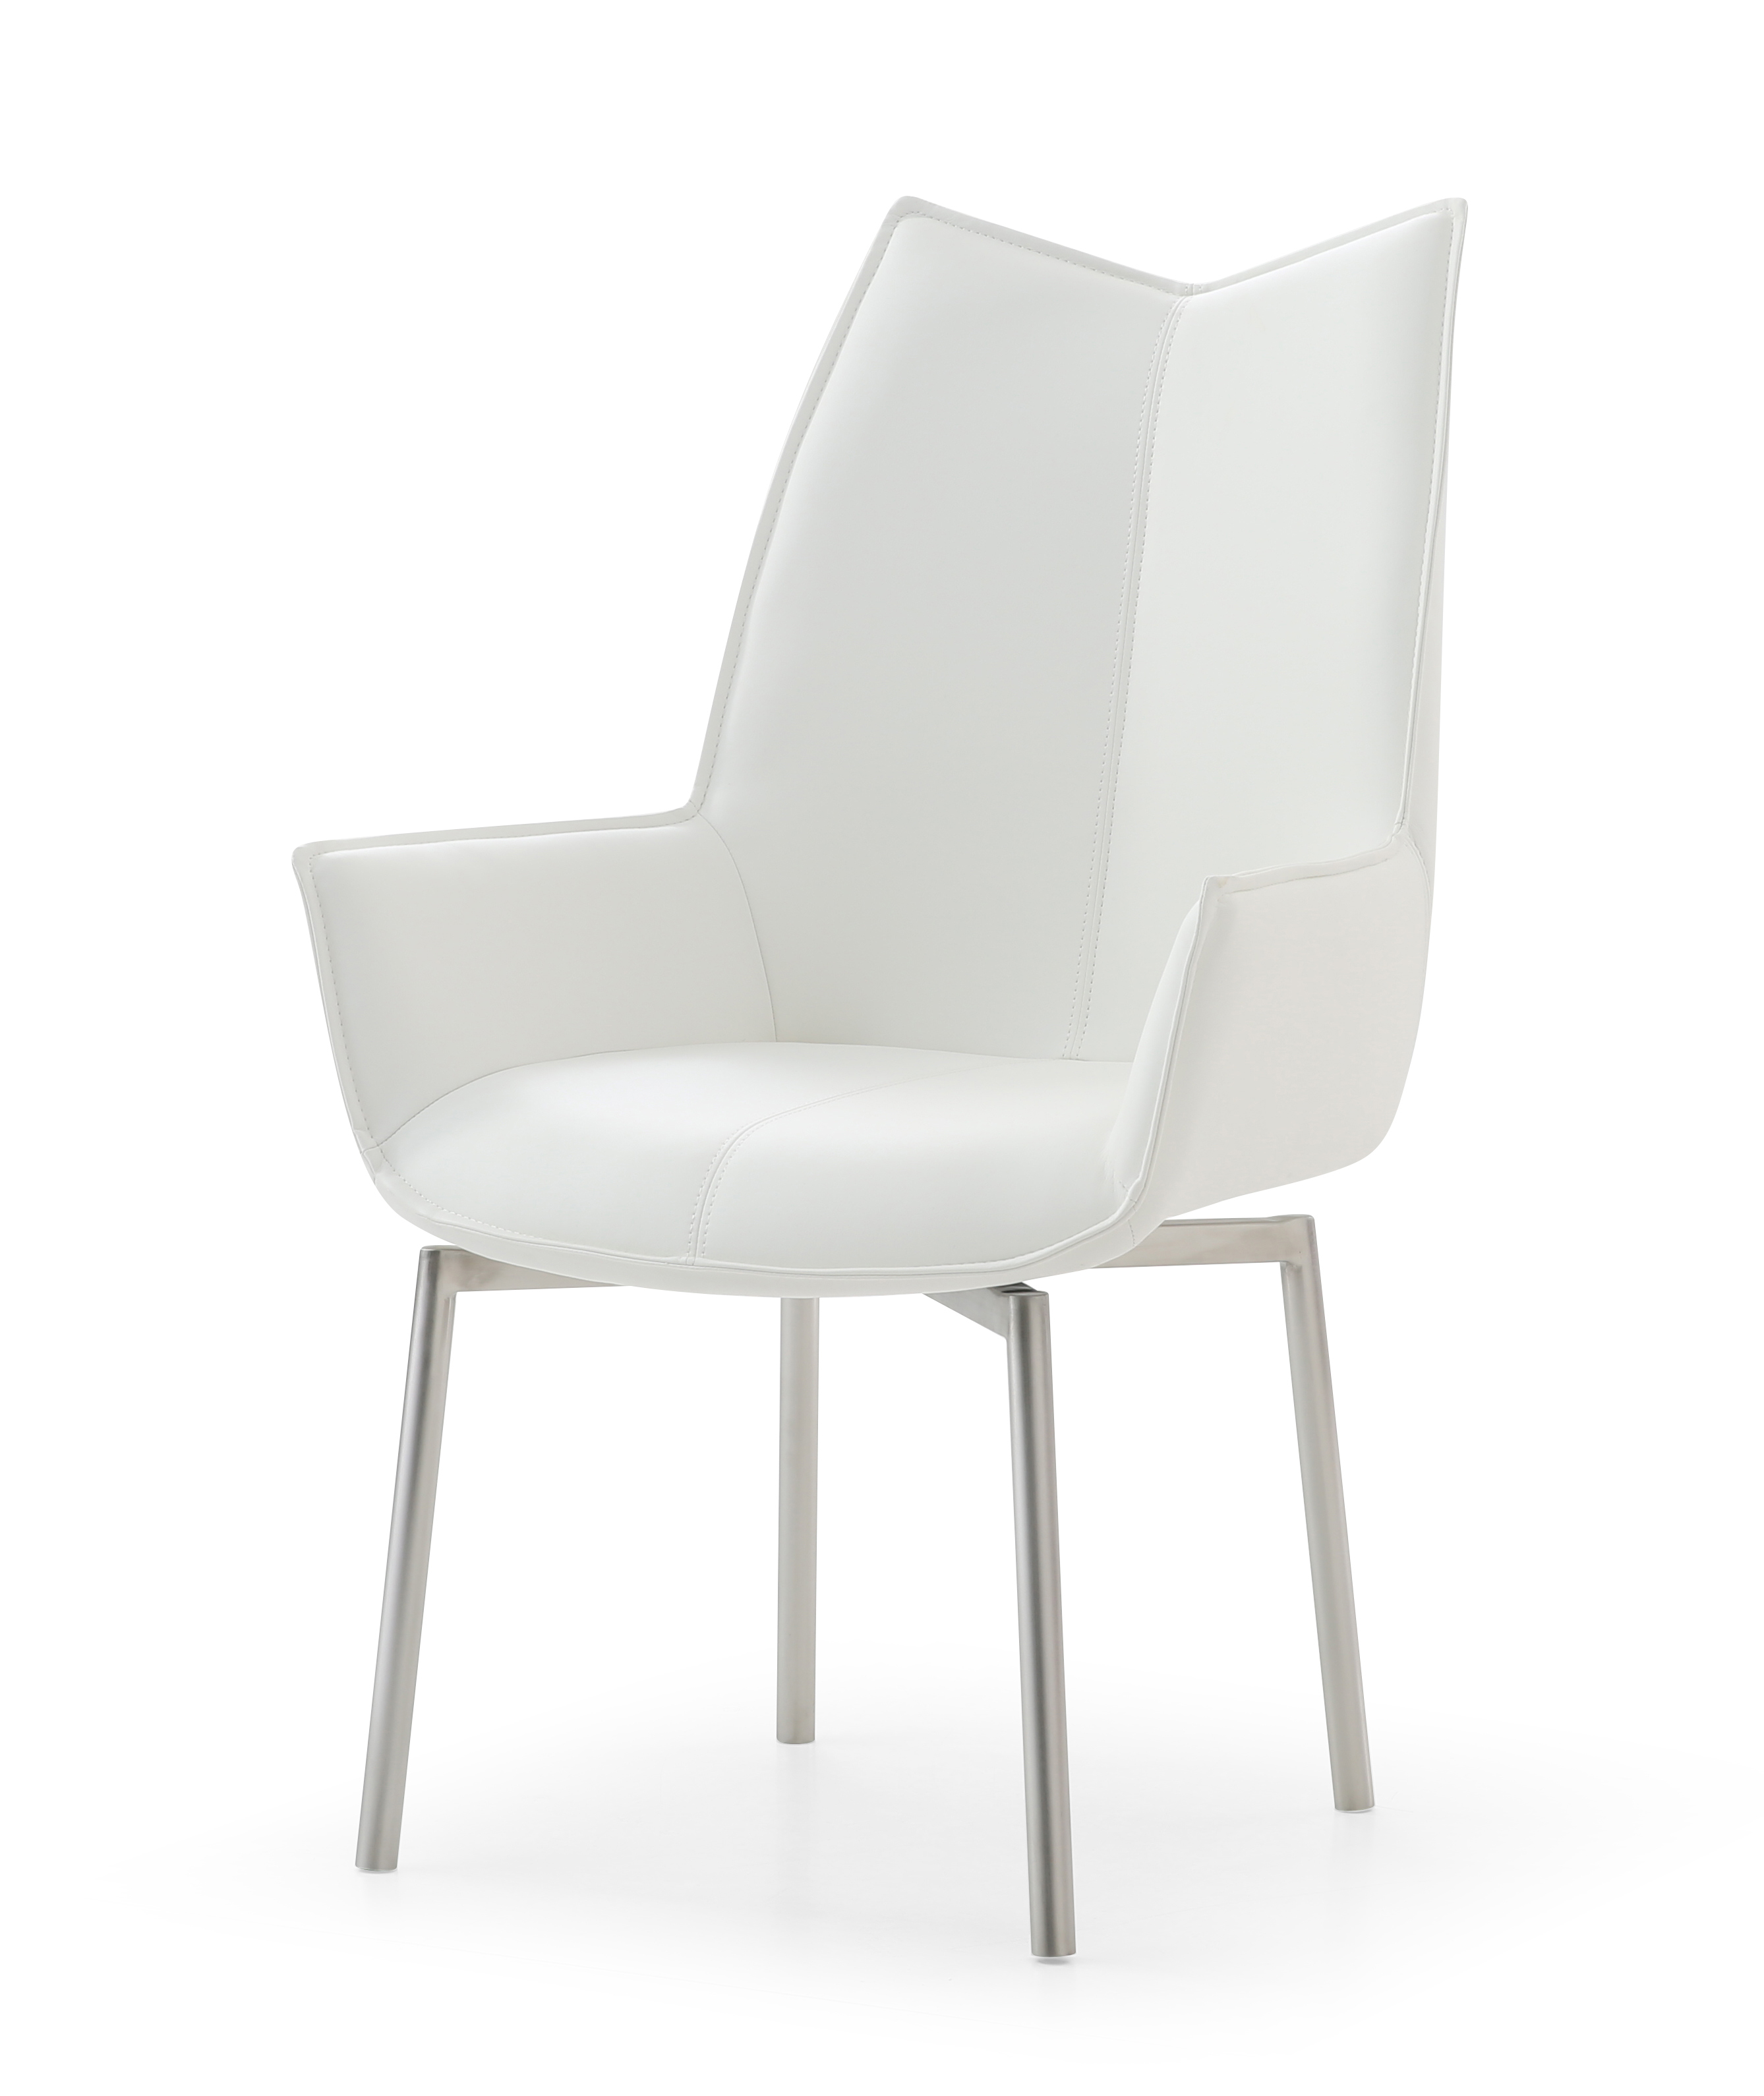 Dining Room Furniture Swivel Chairs 1218 swivel dining chair White